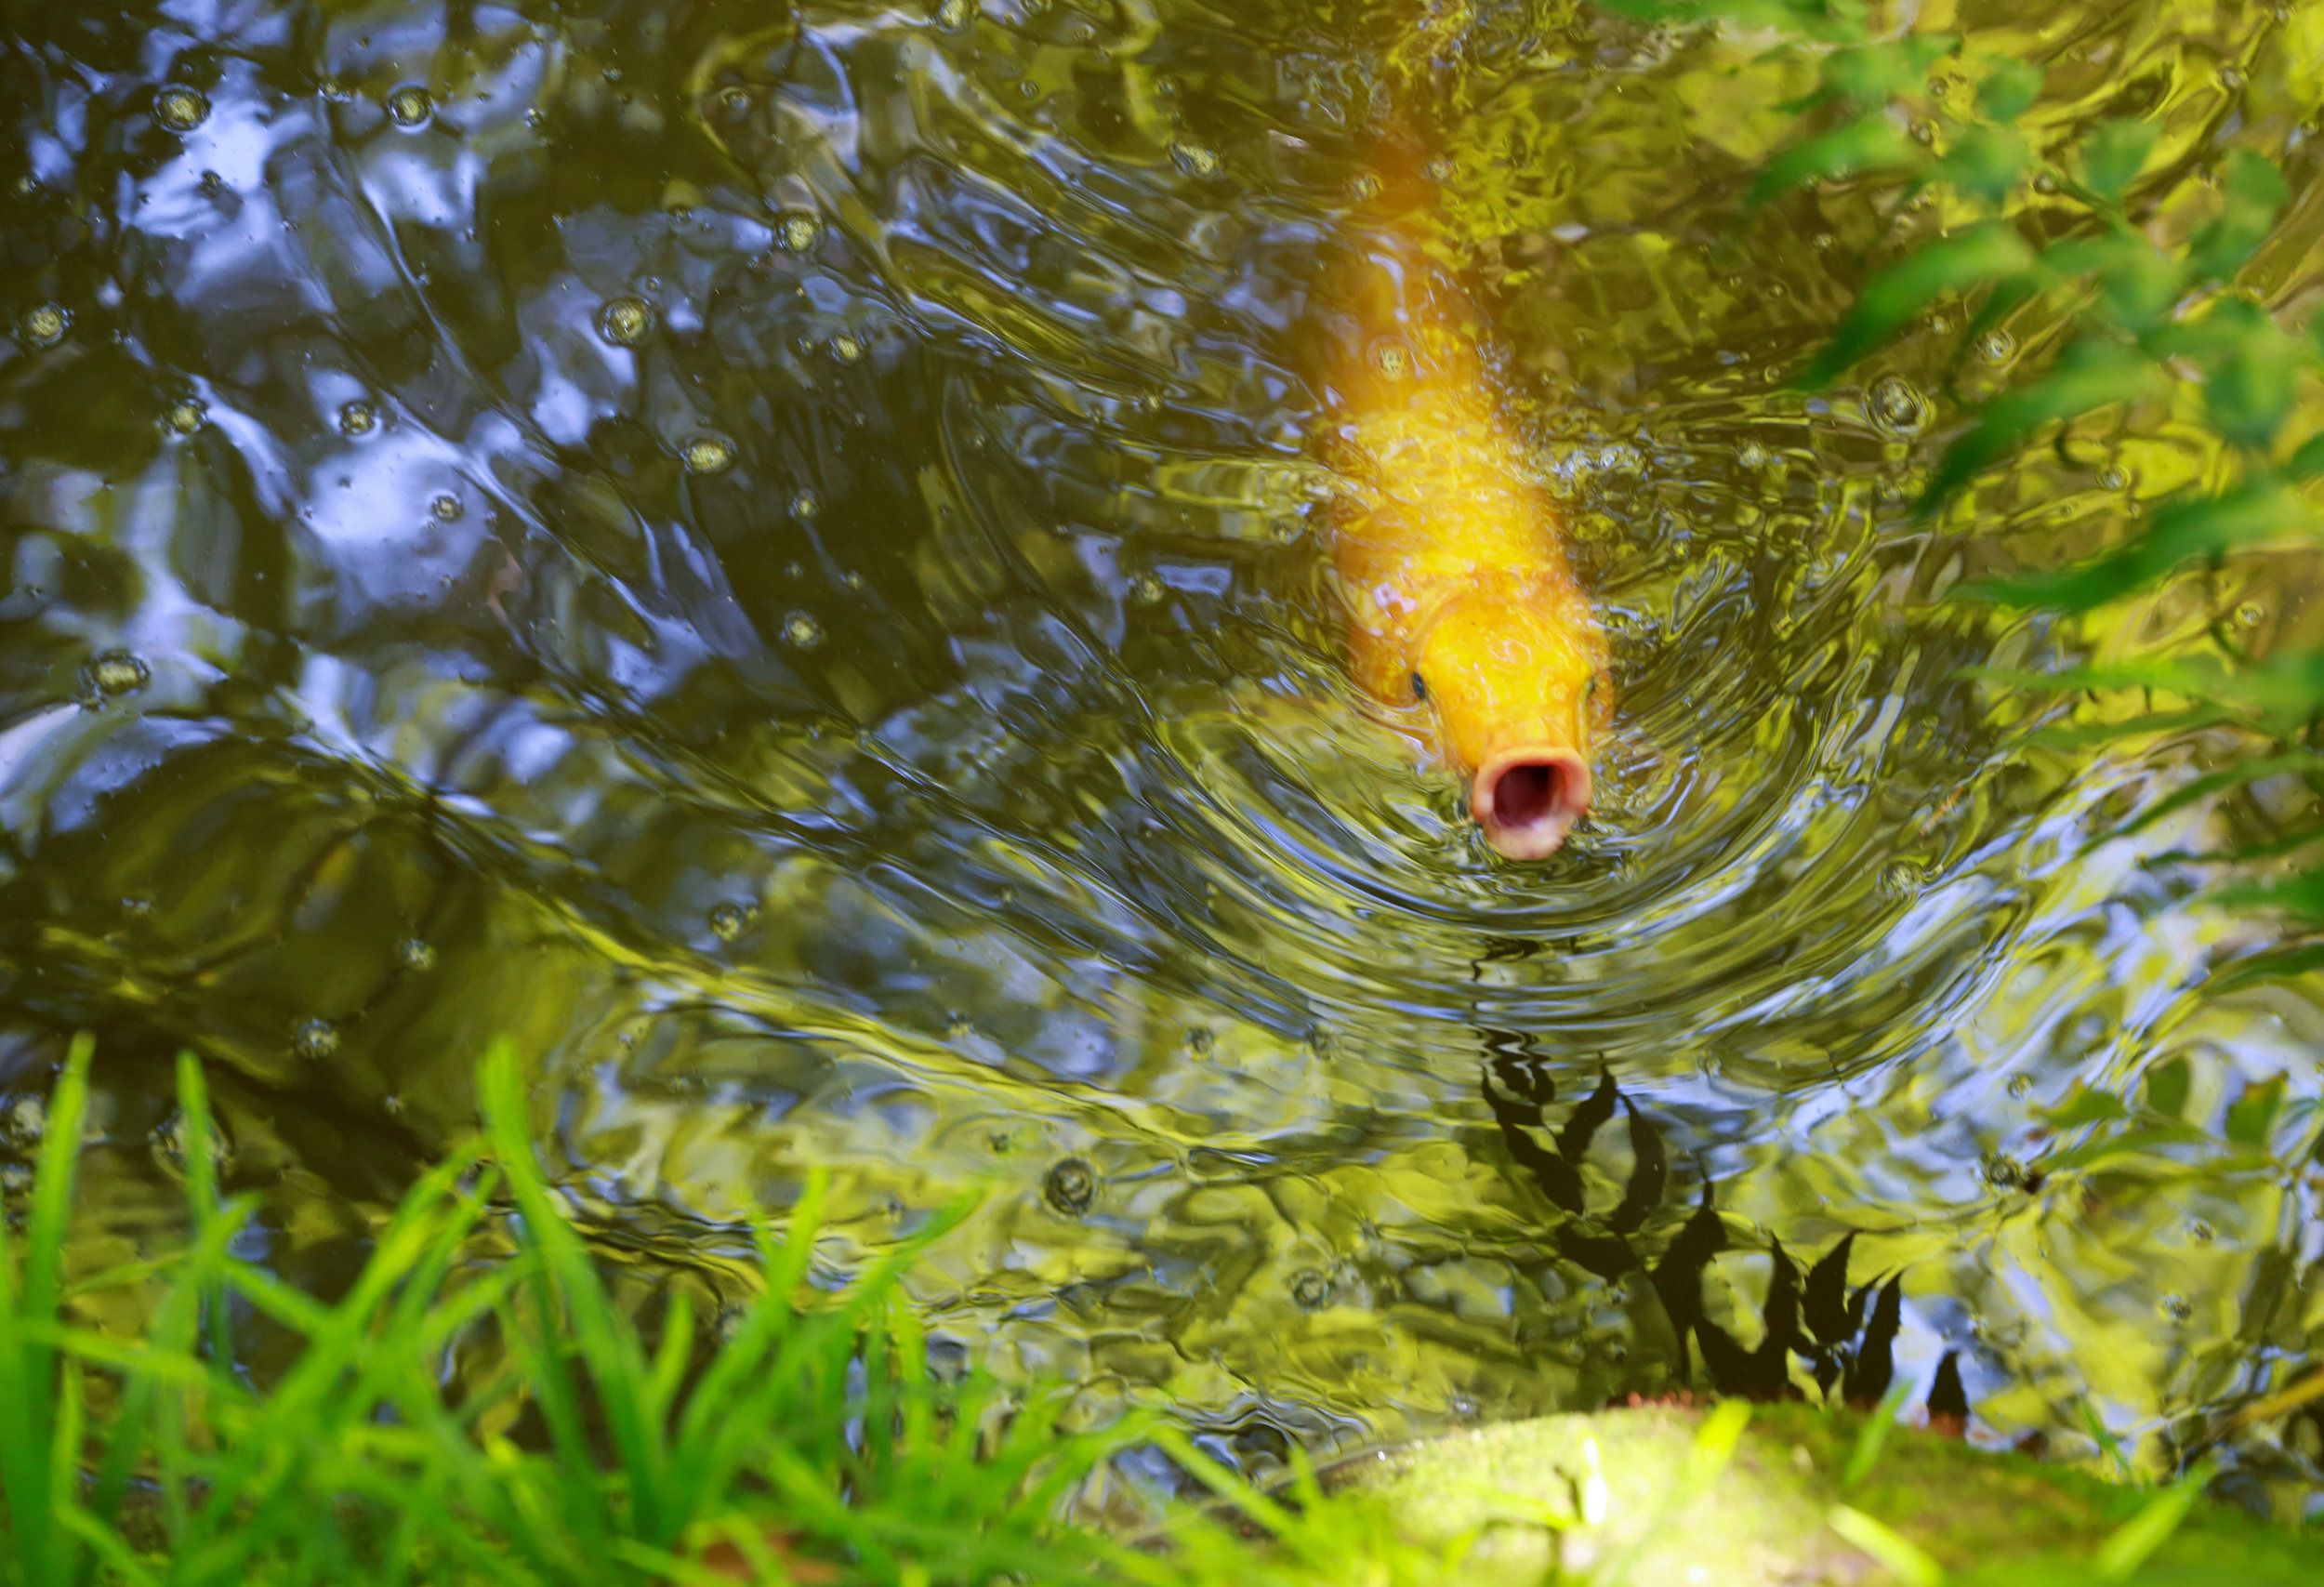  A koi fish swims in a pond at the Rakusui-en garden in Fukouka, Japan on June, 22, 2018. 